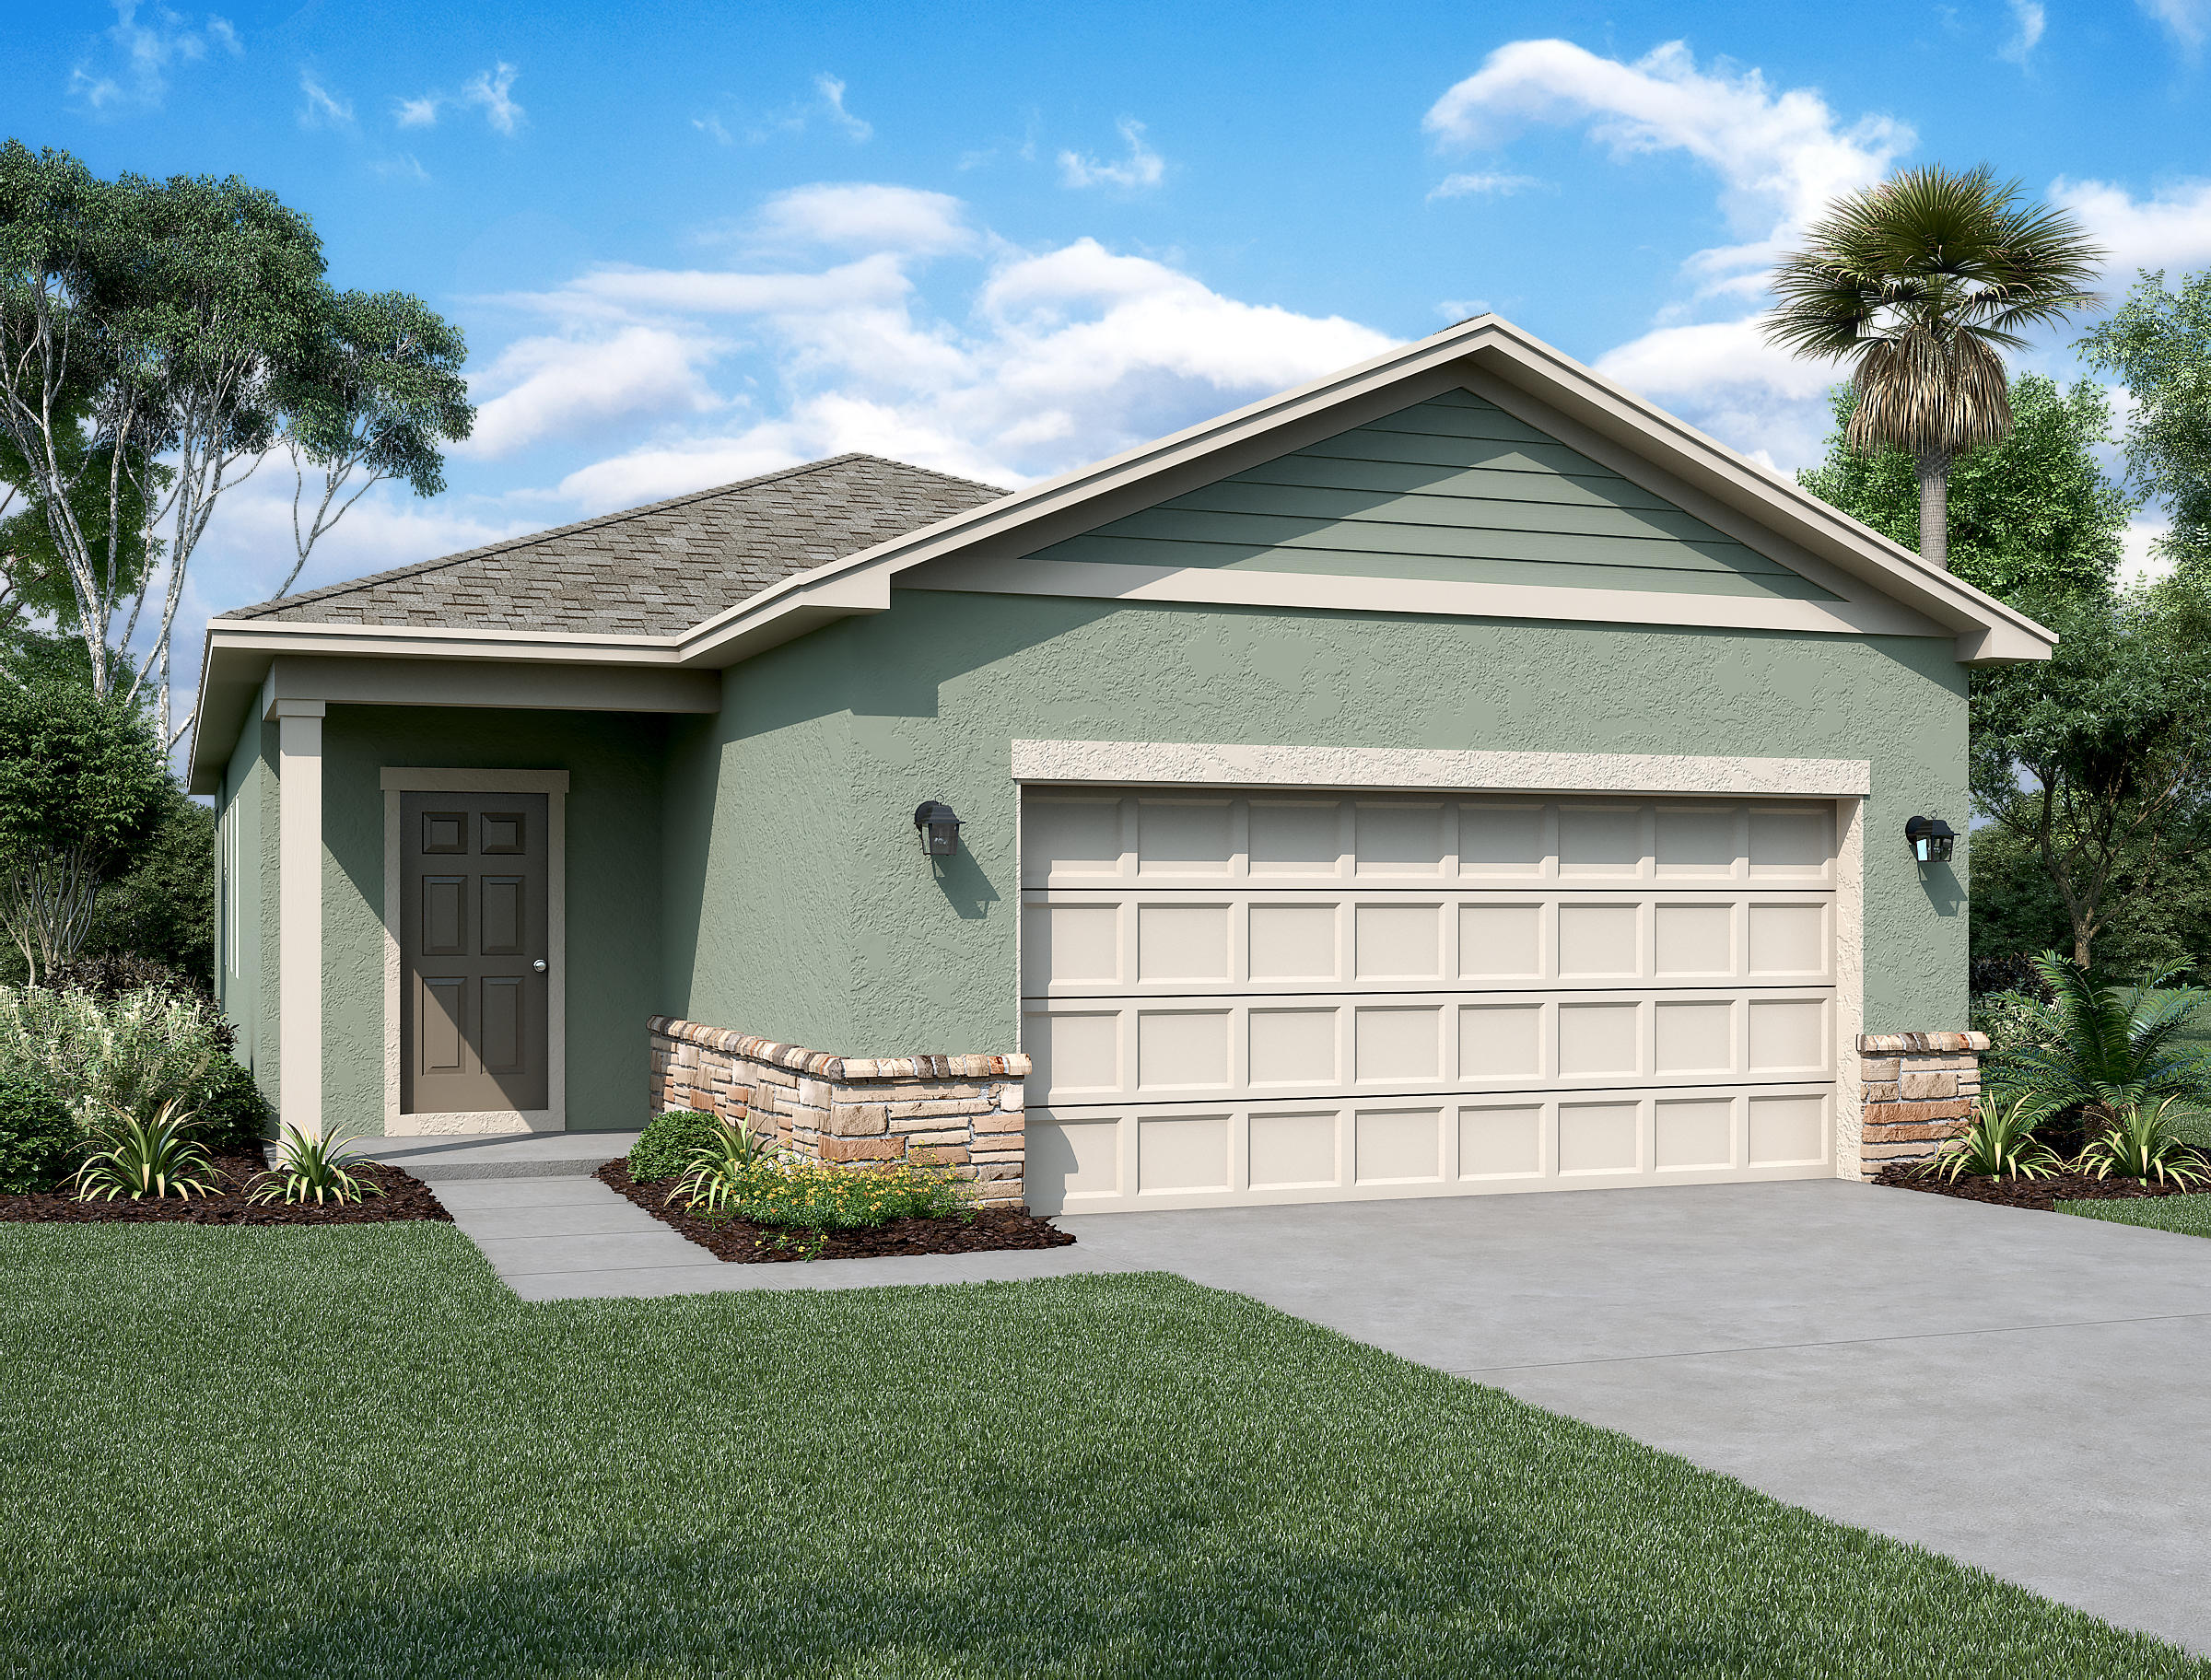 Check out our Odyssey plan in our Groveland, FL new home neighborhood, Phillips Landing!